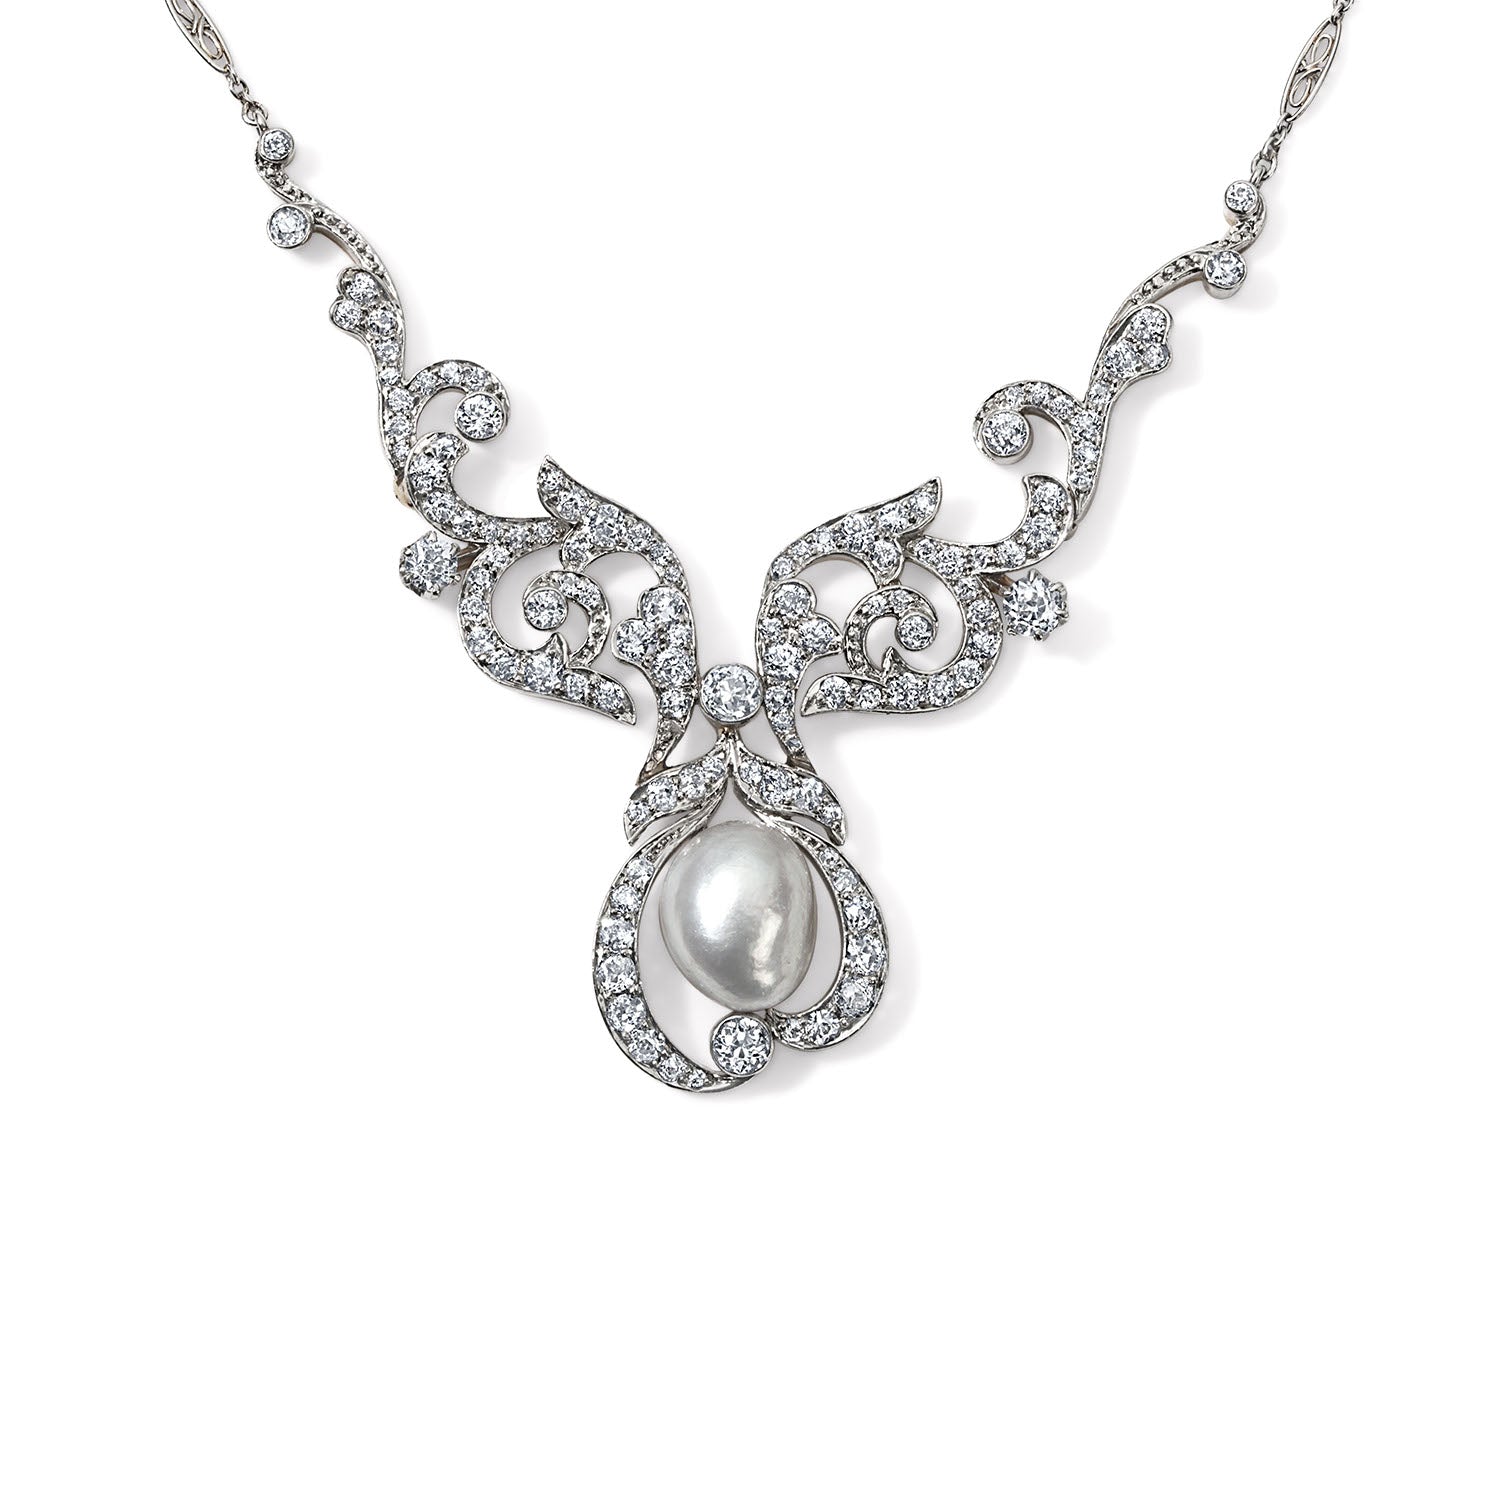 French Victorian Diamond and Pearl Necklace